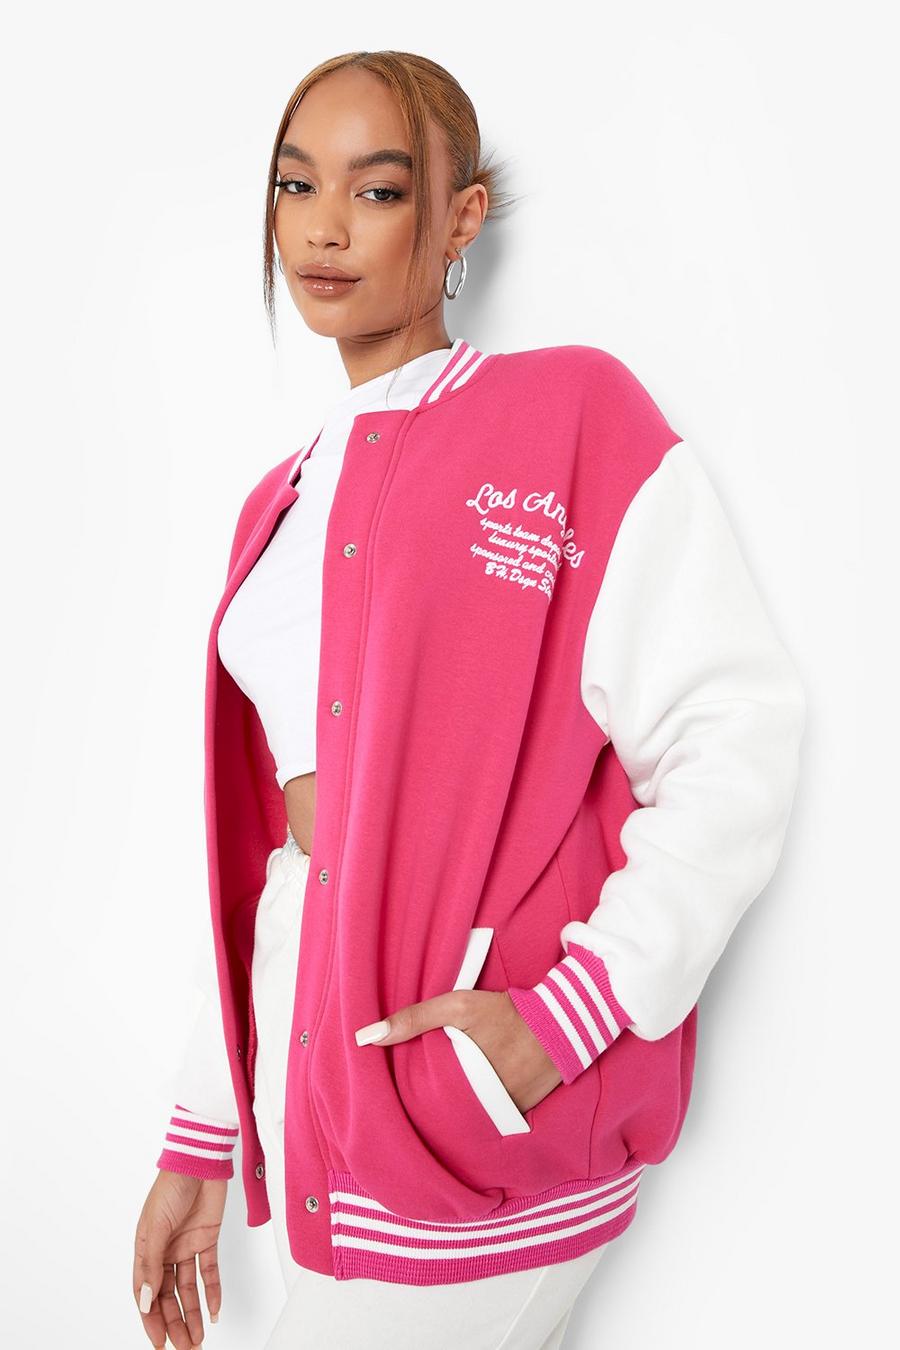 Giacca Bomber stile Varsity con scritta Los Angeles, Hot pink rosa